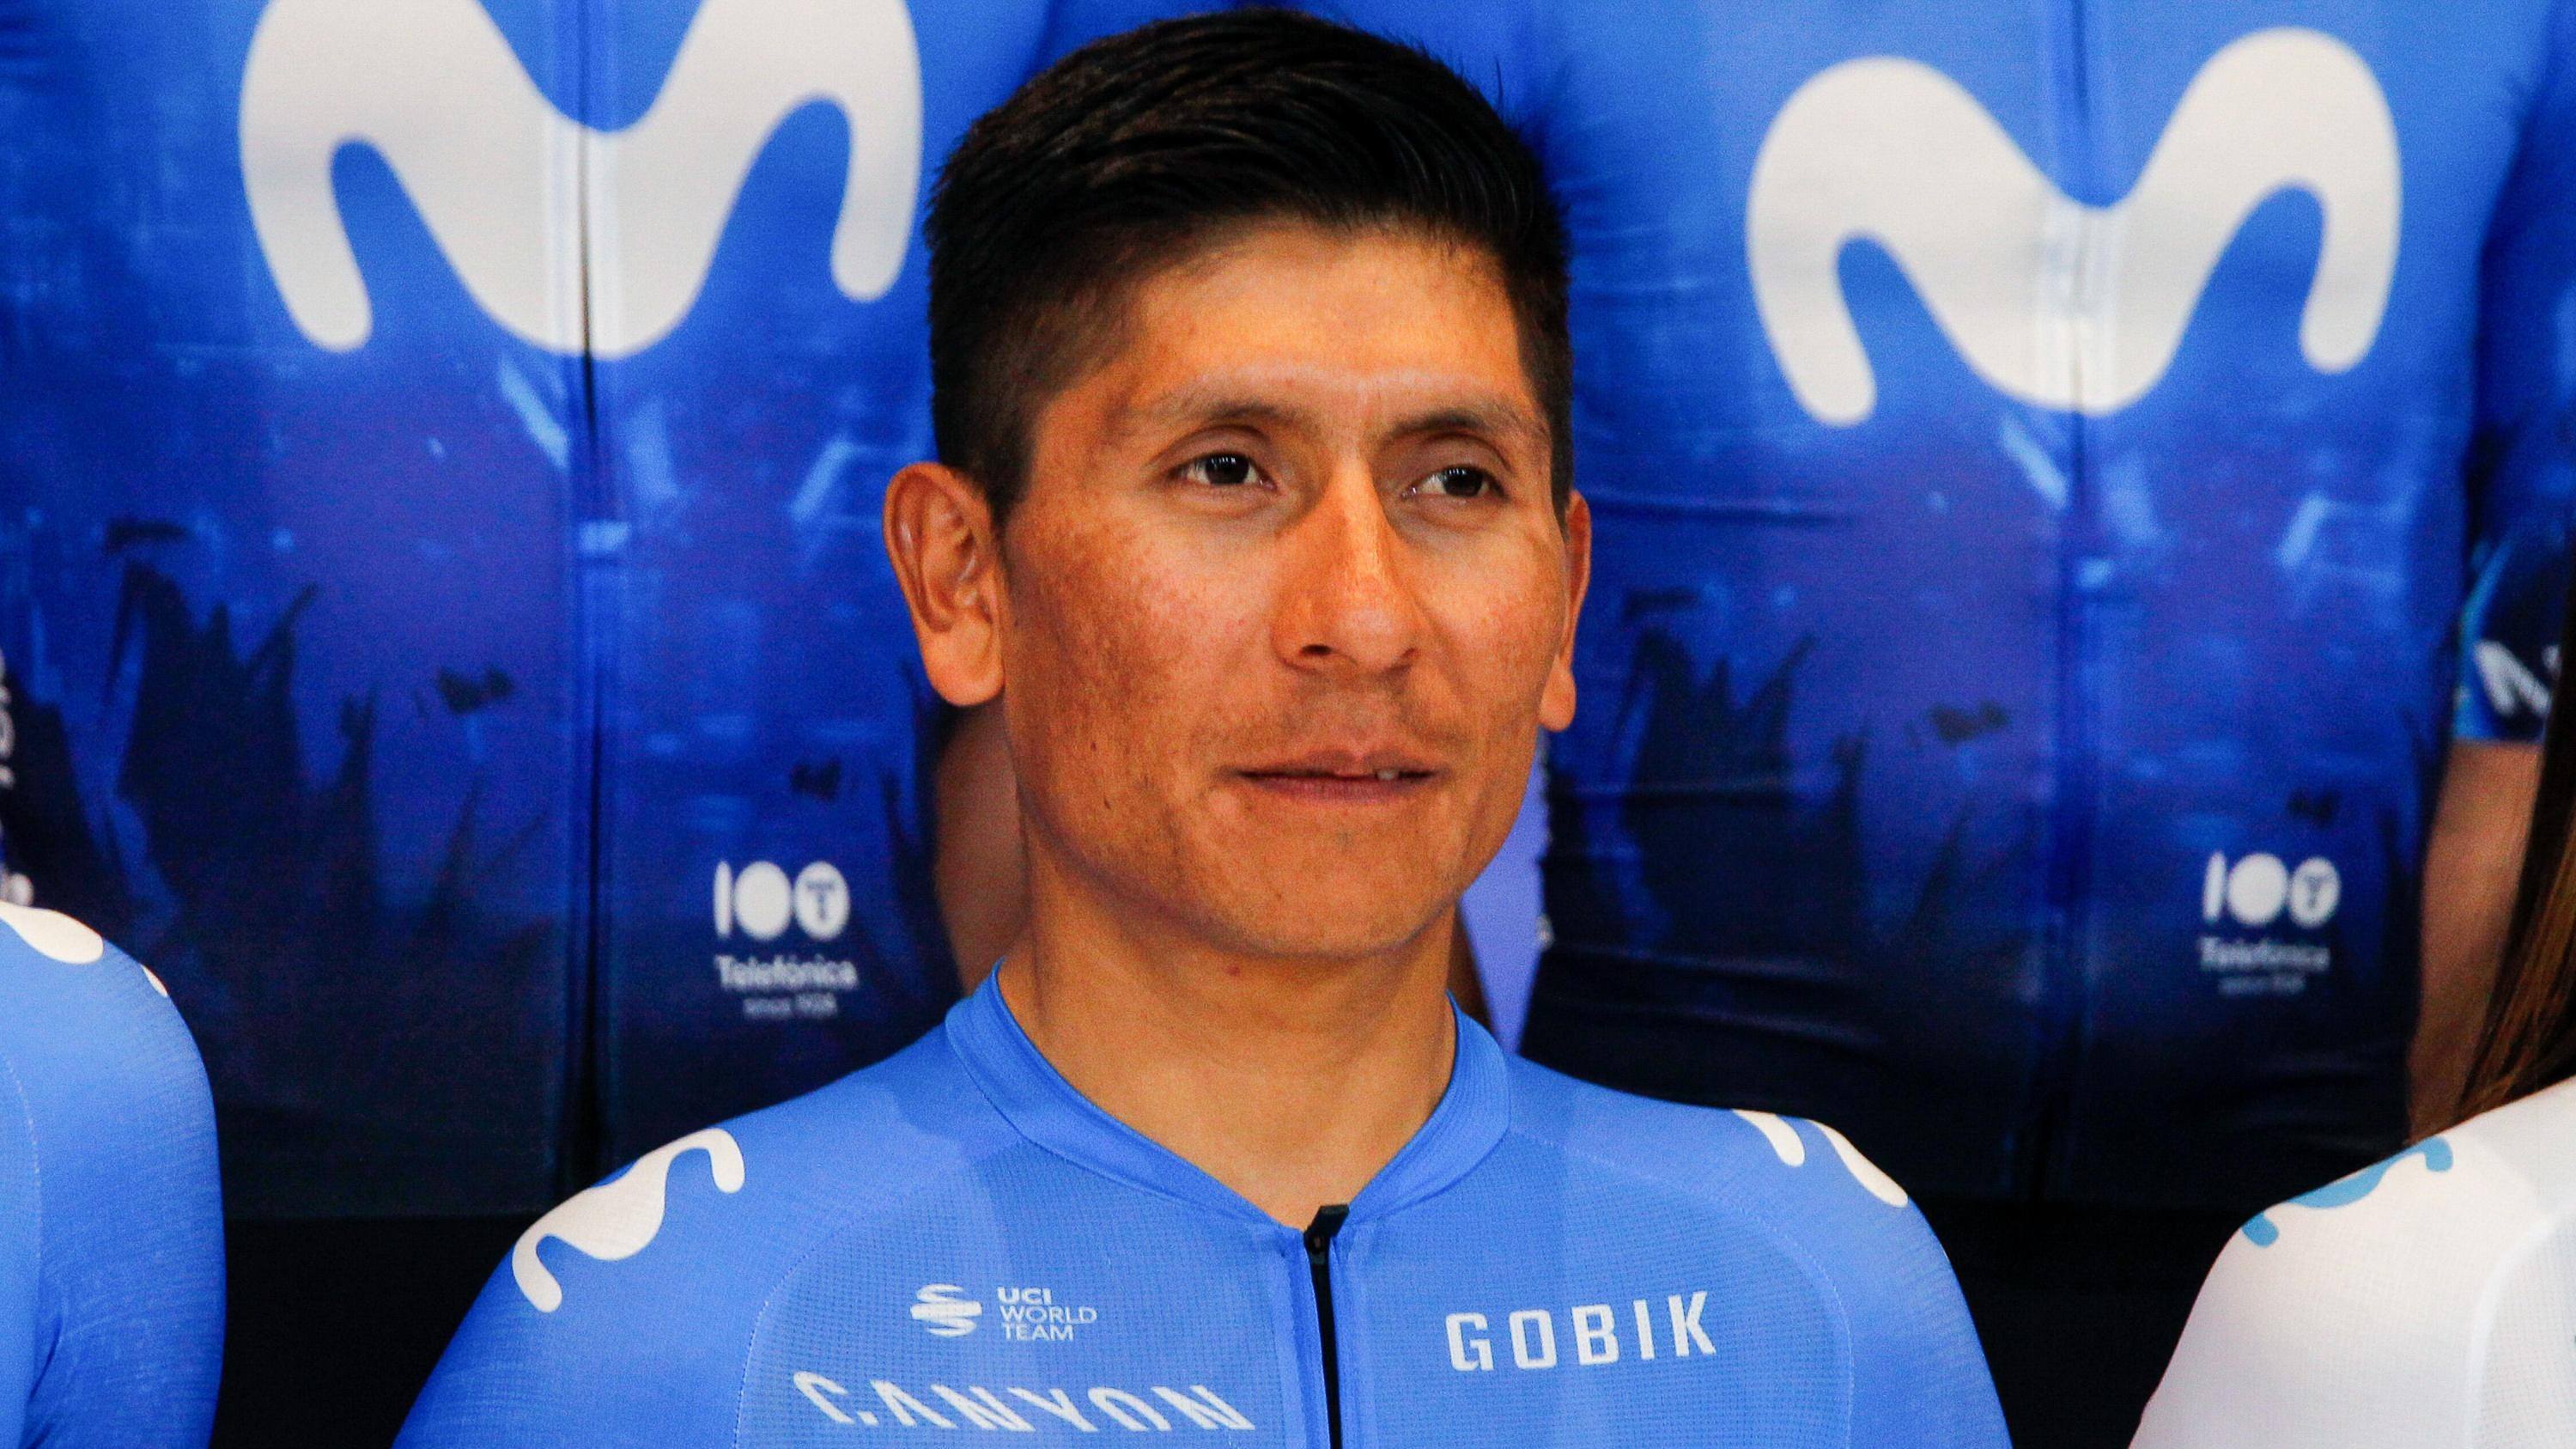 Tour de France: Quintana doctor, suspected of doping in 2020, will be tried in September